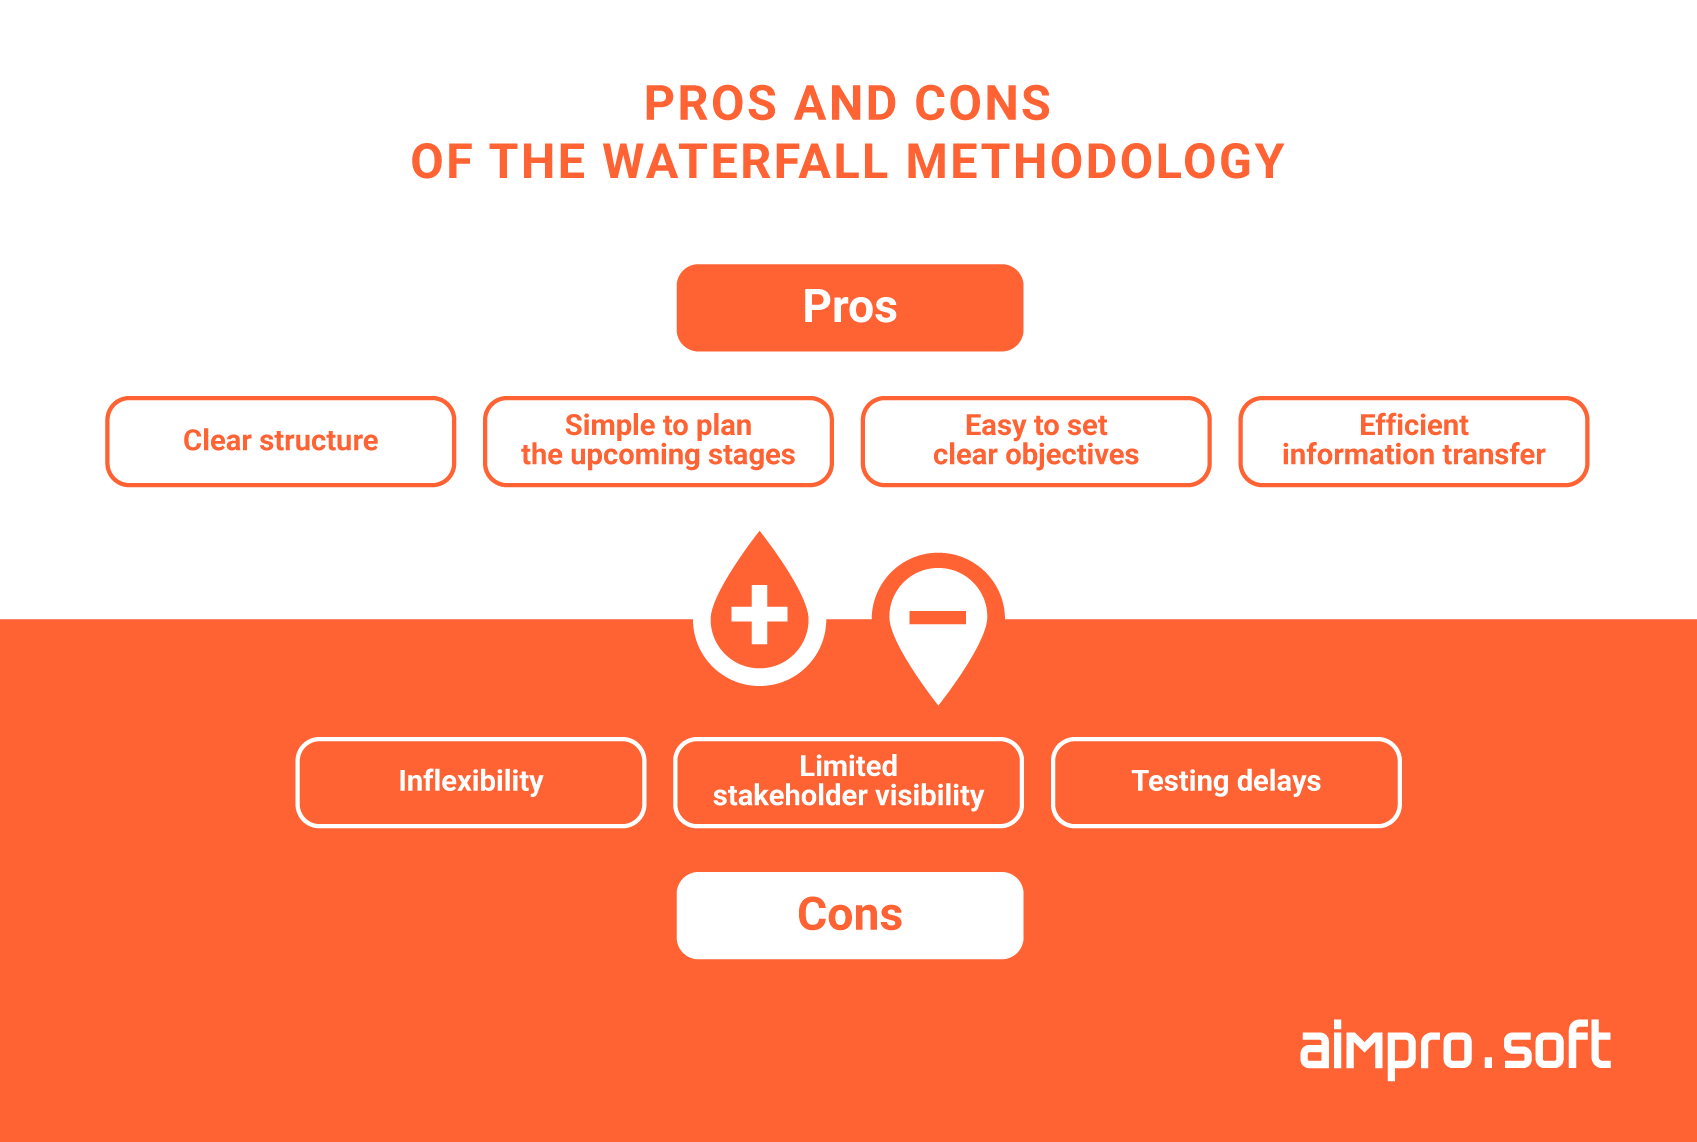 Pros and cons of Waterfall